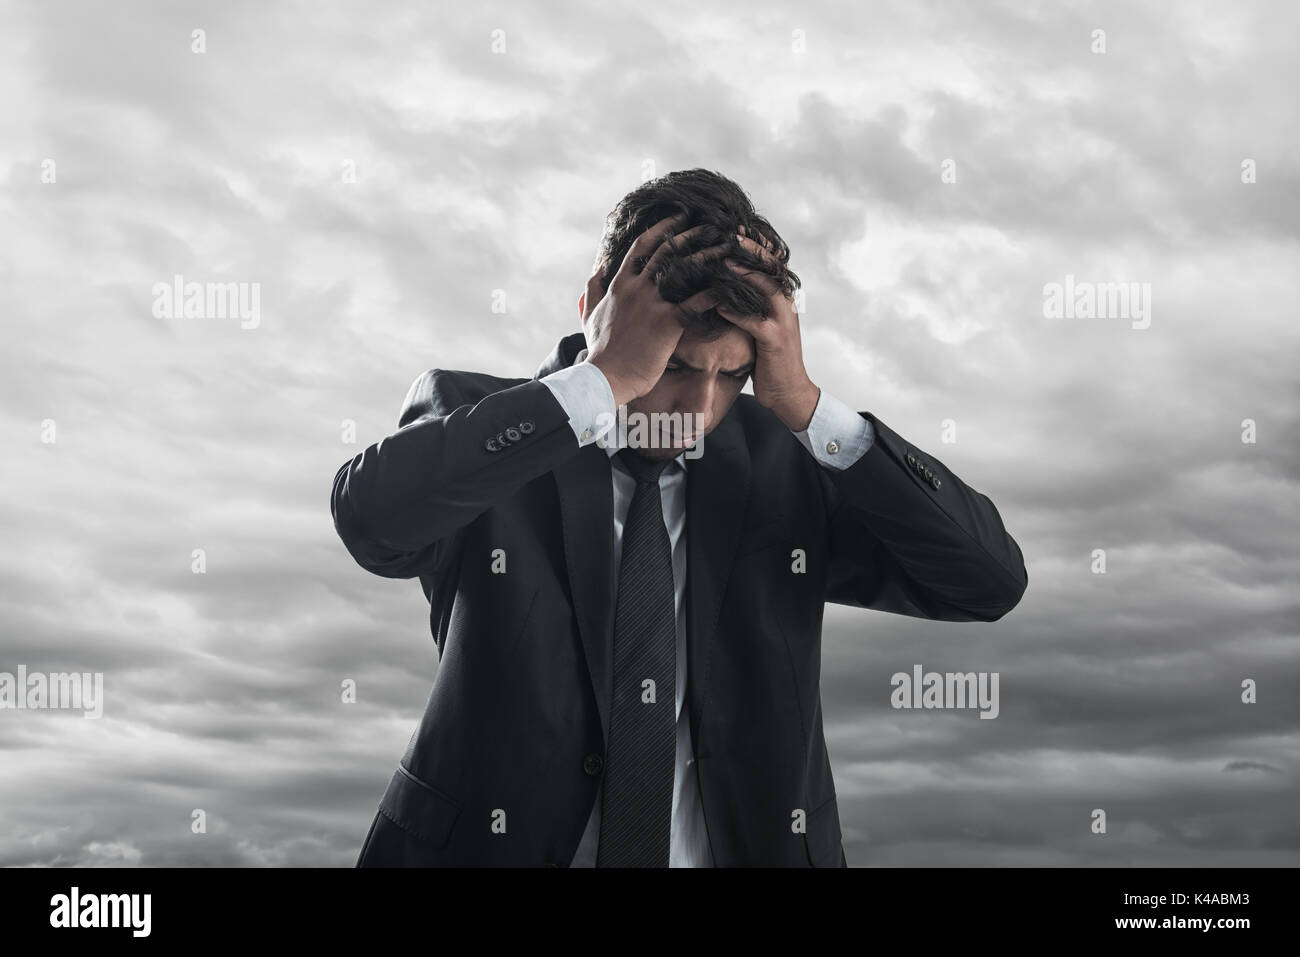 Bankrupted businessman with depressed look on his face Stock Photo